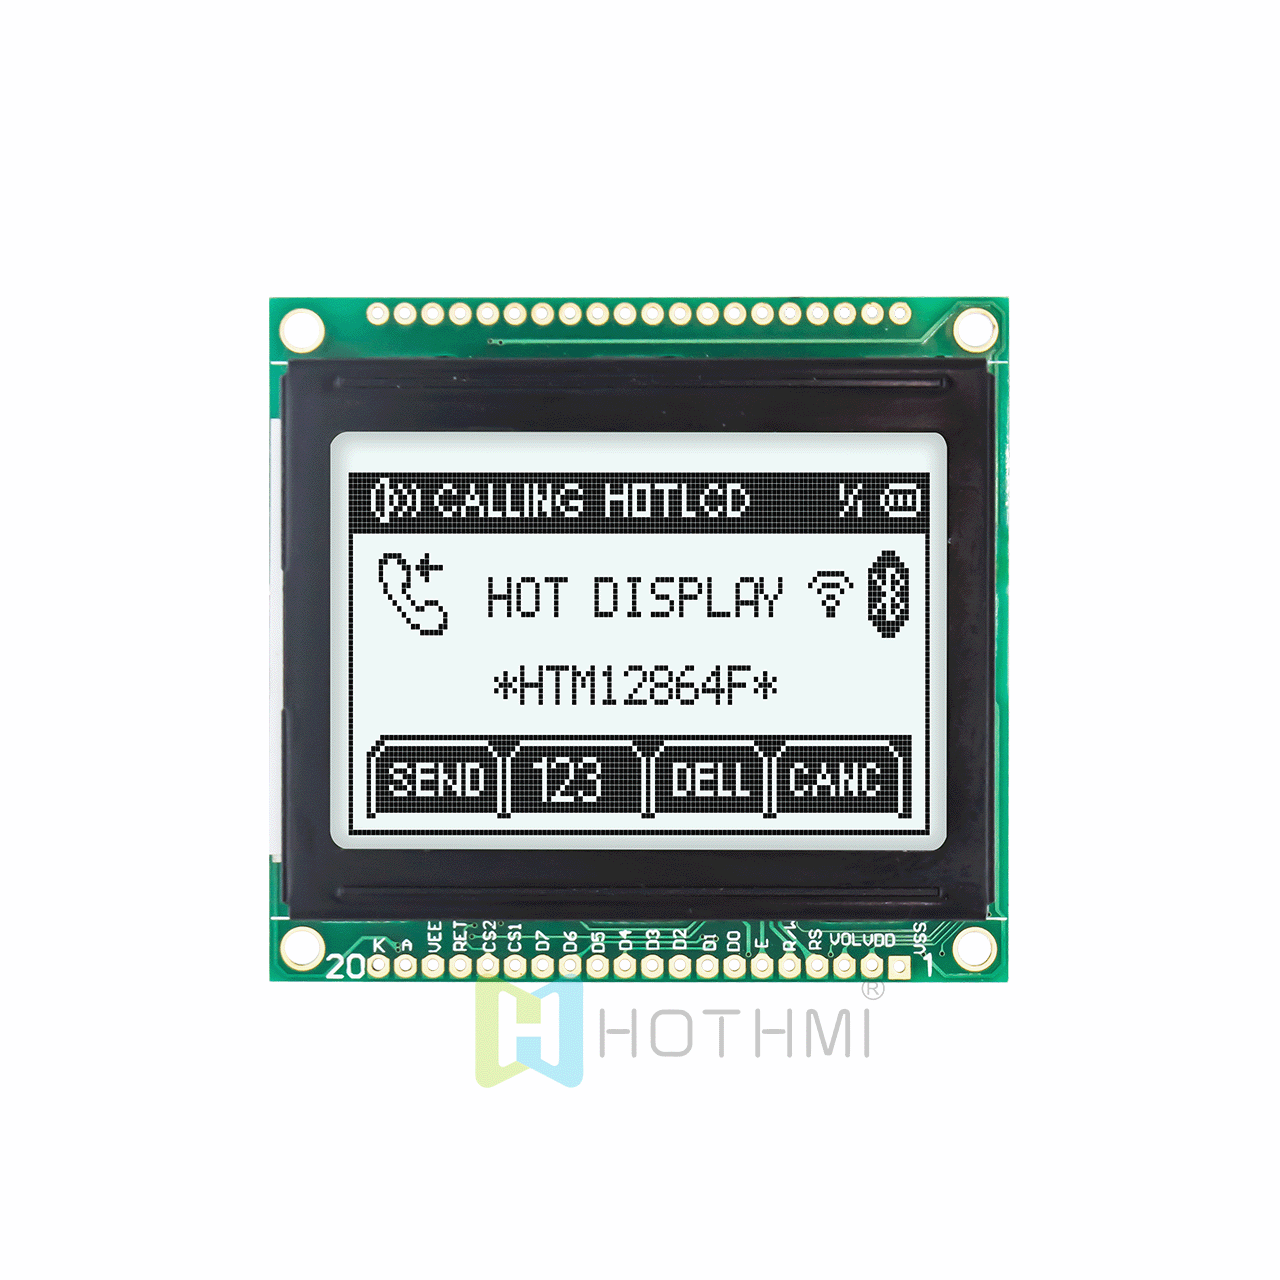 2-inch low-cost graphic LCD module | 128 x 64 graphic COB module | 12864 graphic LCD display | KS108 AIP31107 controller | FSTN front display | gray text on white background